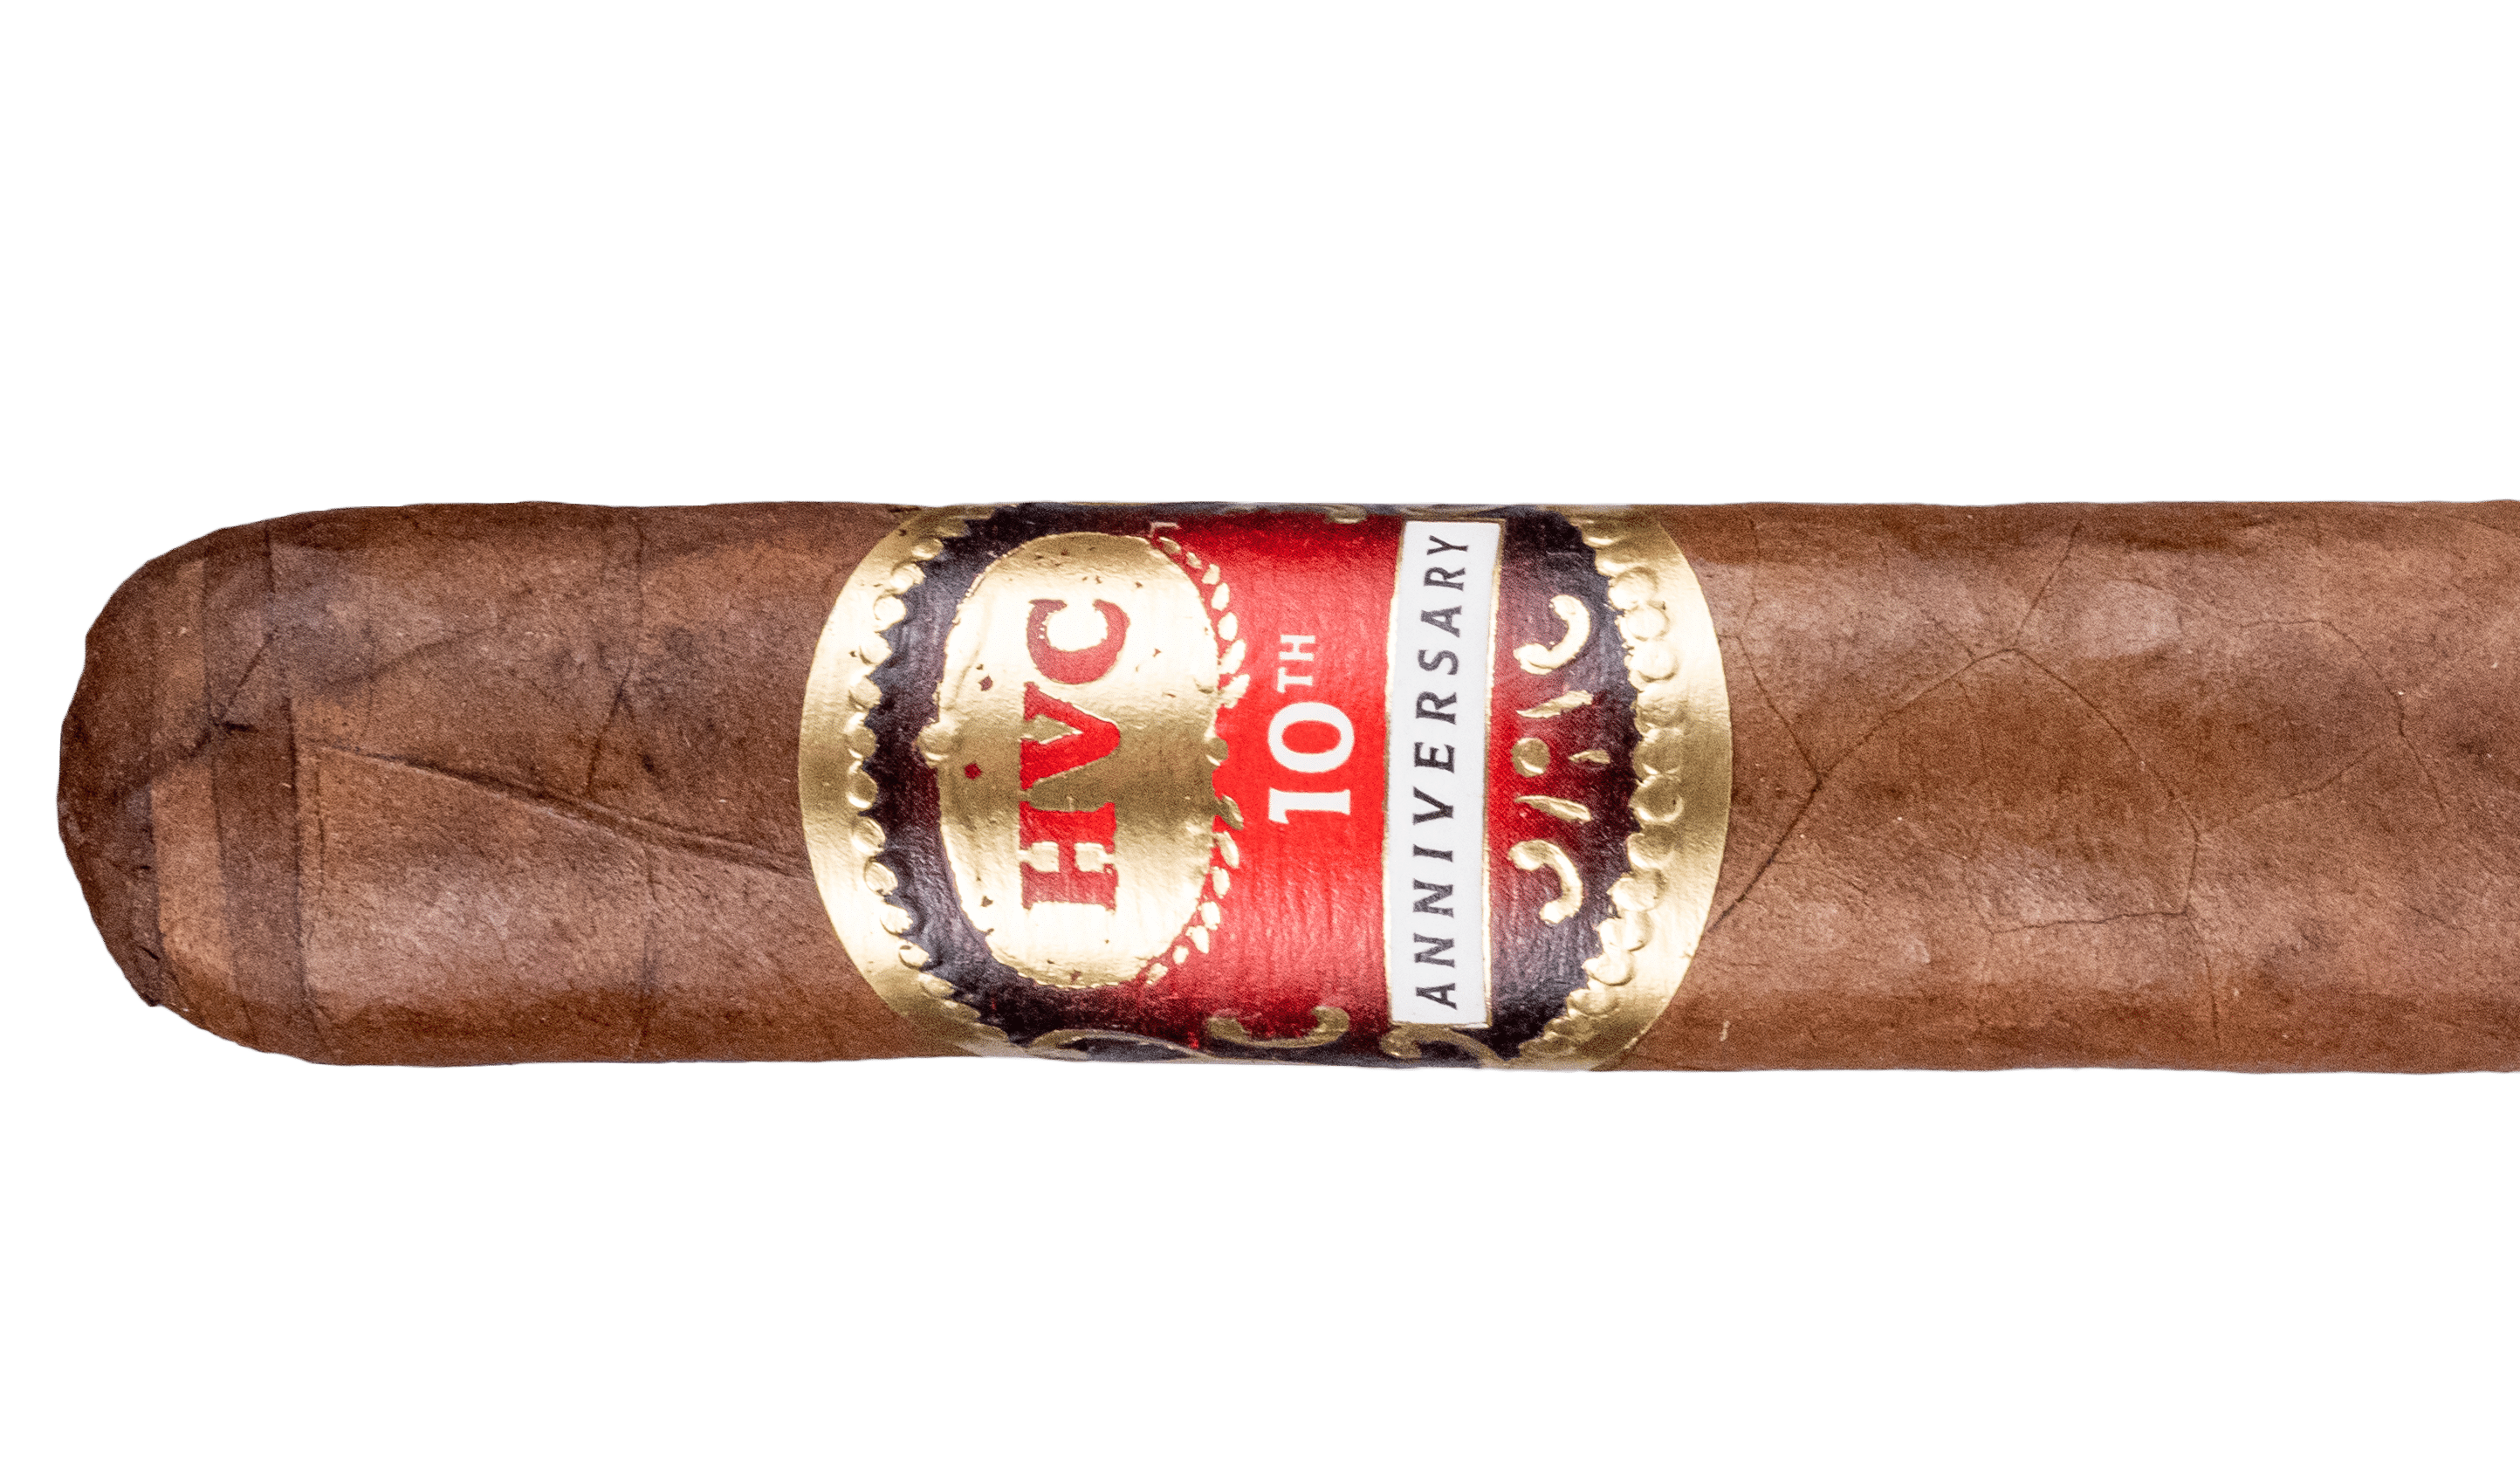 HVC 10th Anniversary - Blind Cigar Review